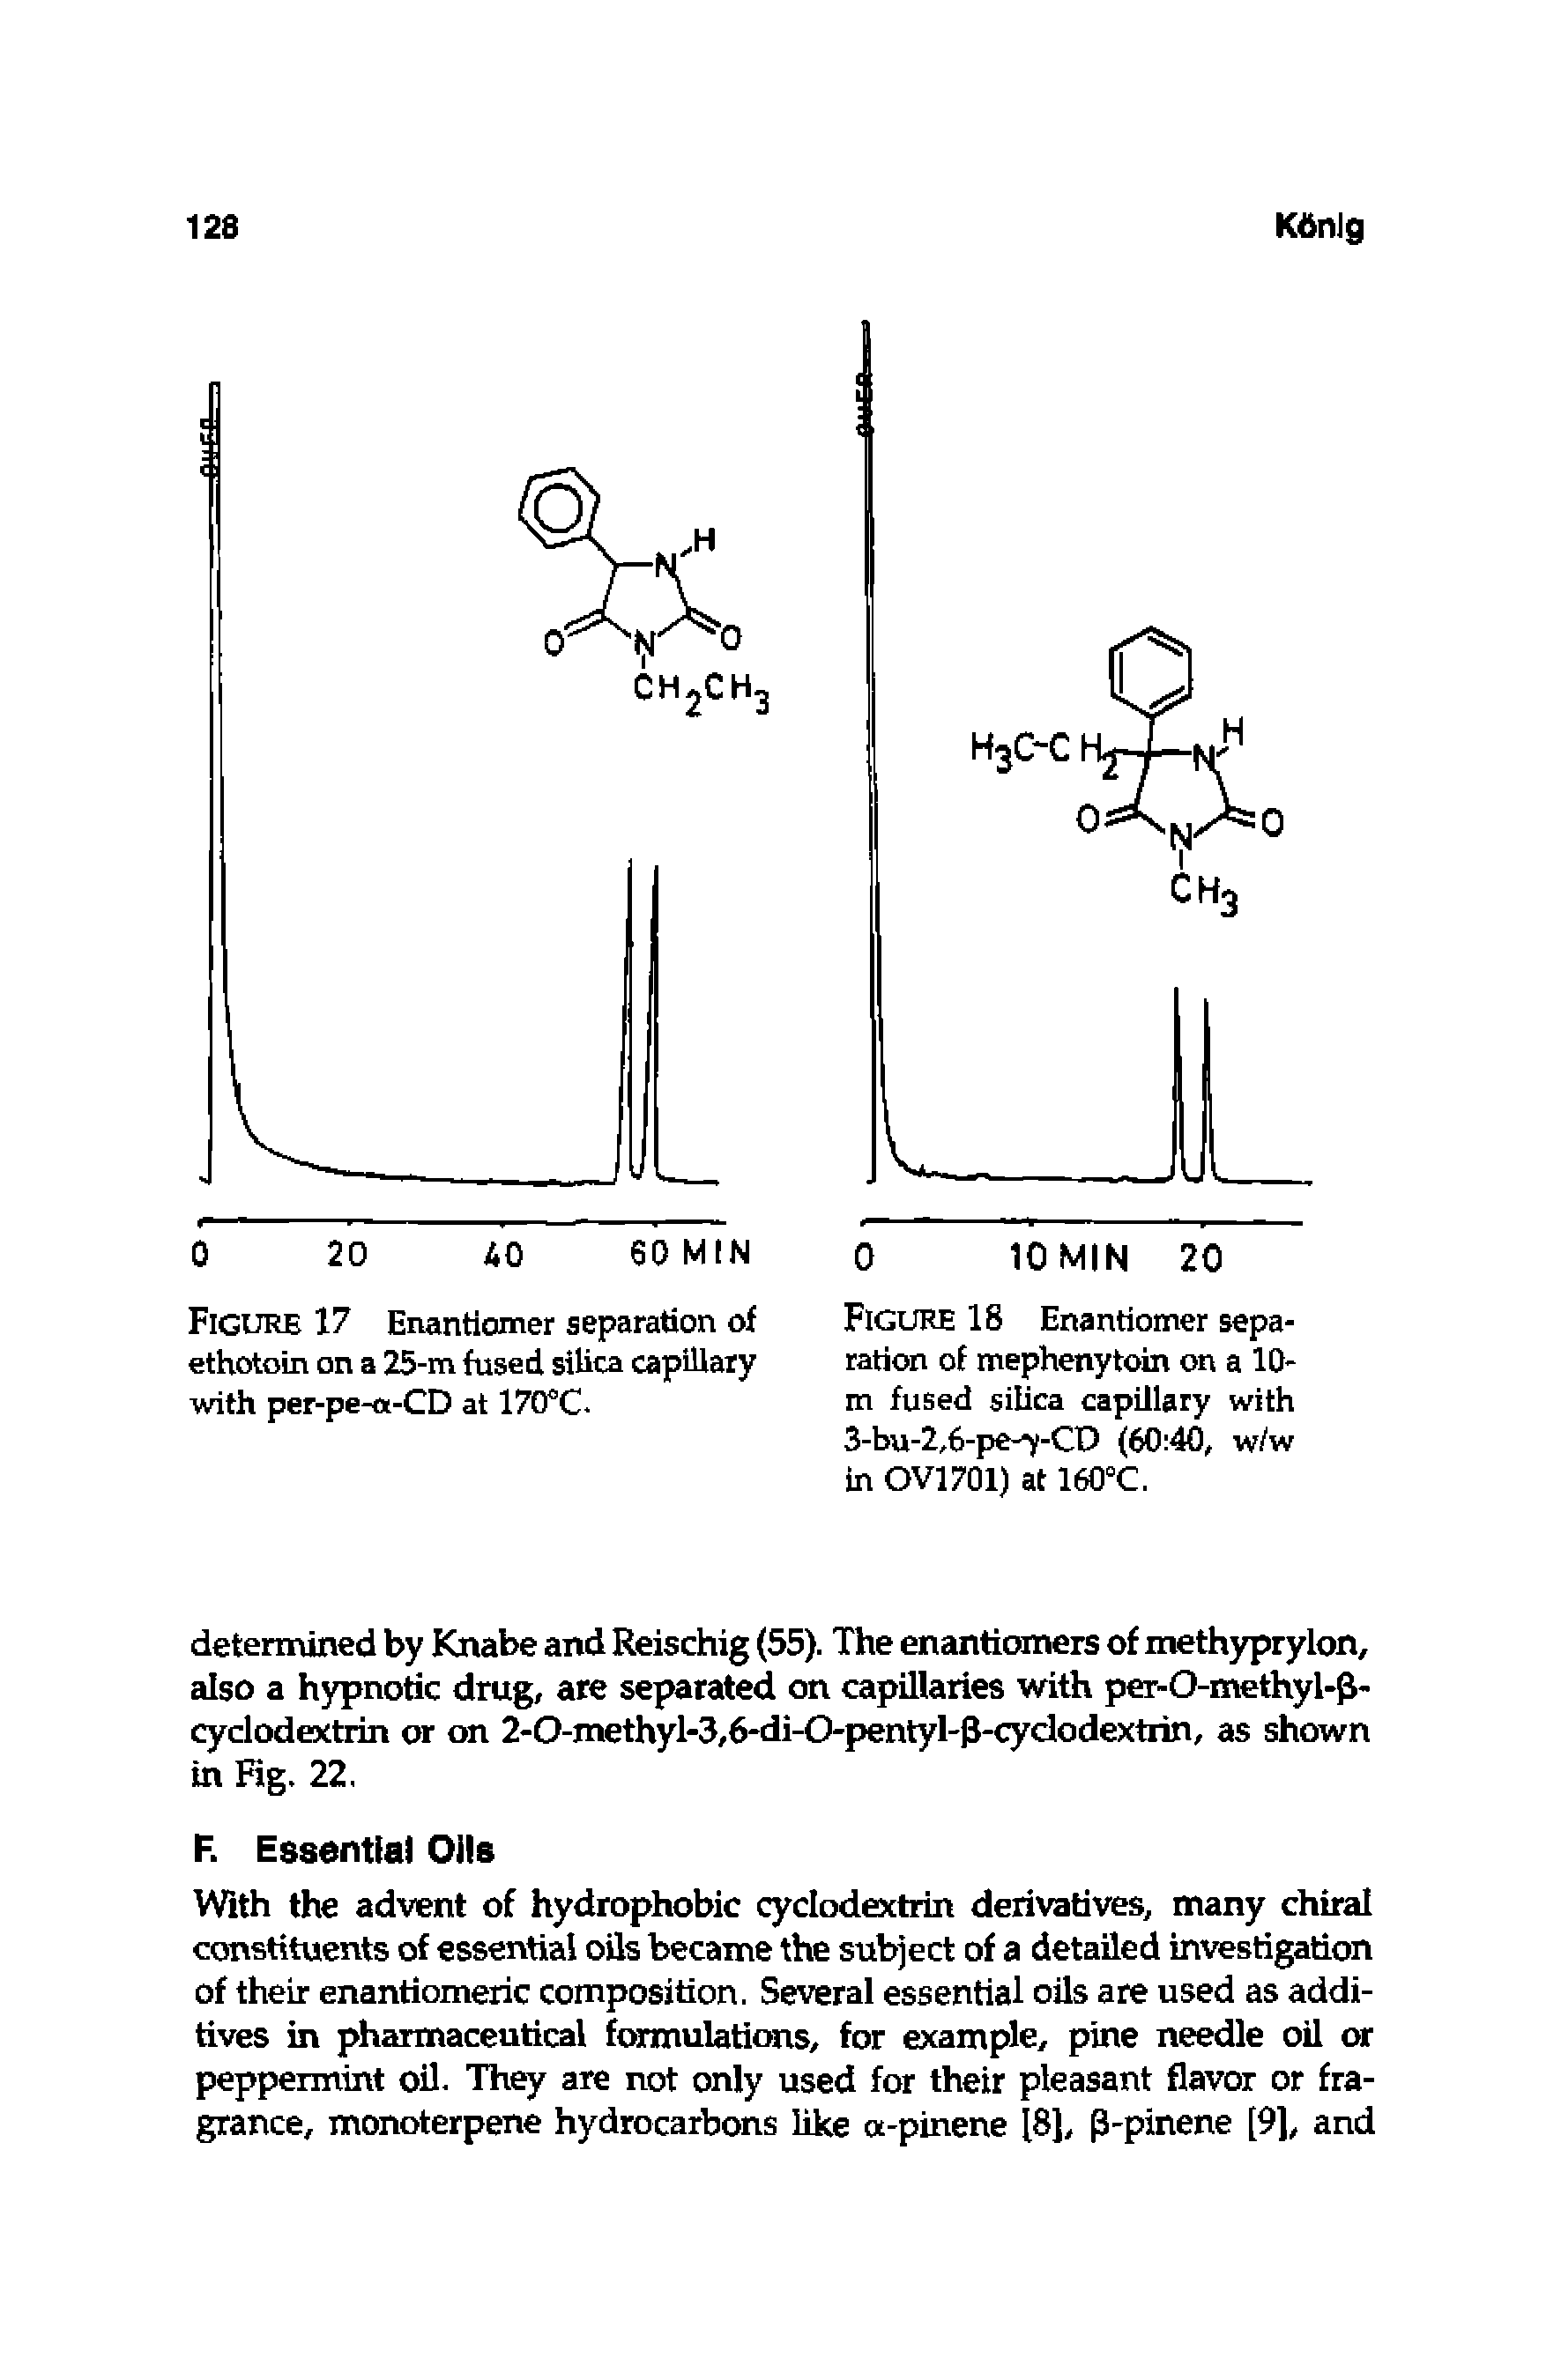 Figure 18 Enantiomer separation of mephenytoin on a 10-m fused silica capillary with 3-bu-2,6-pe-y-CD 60 40, w/w in OV1701) at 160 C.